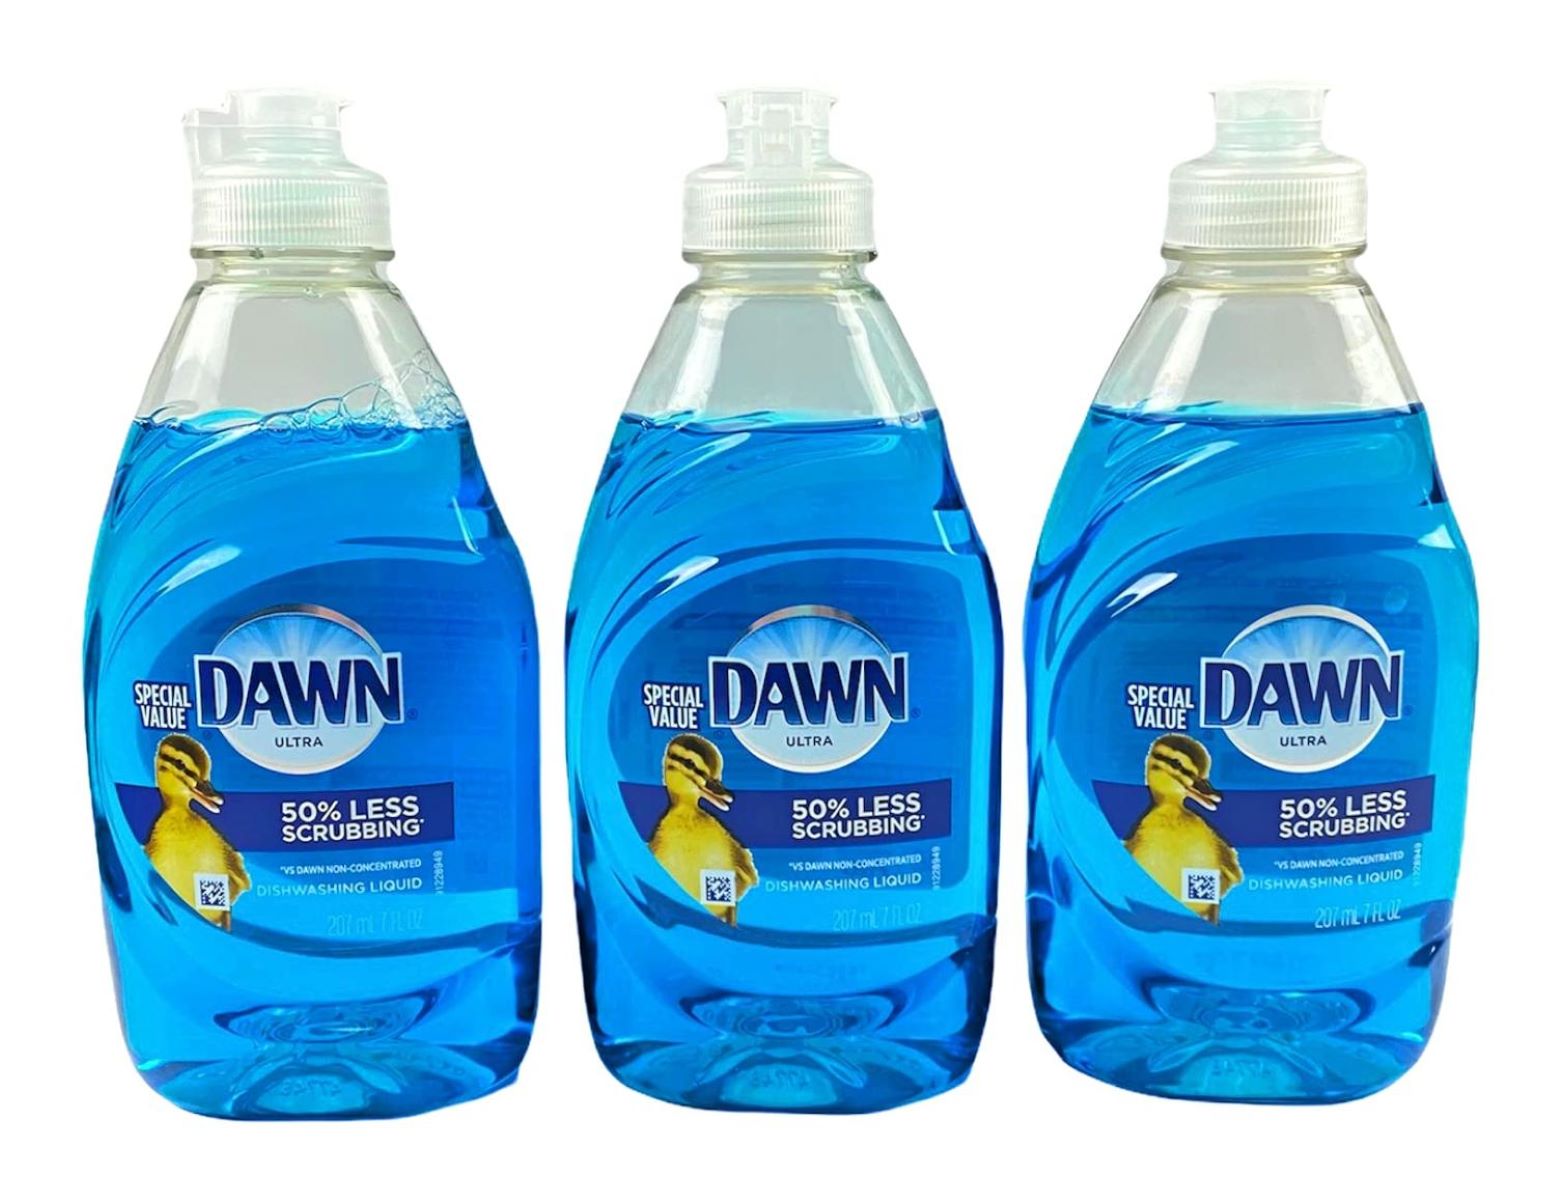 Surprising Truth: Blue Dawn Dishwashing Soap May Not Disinfect!